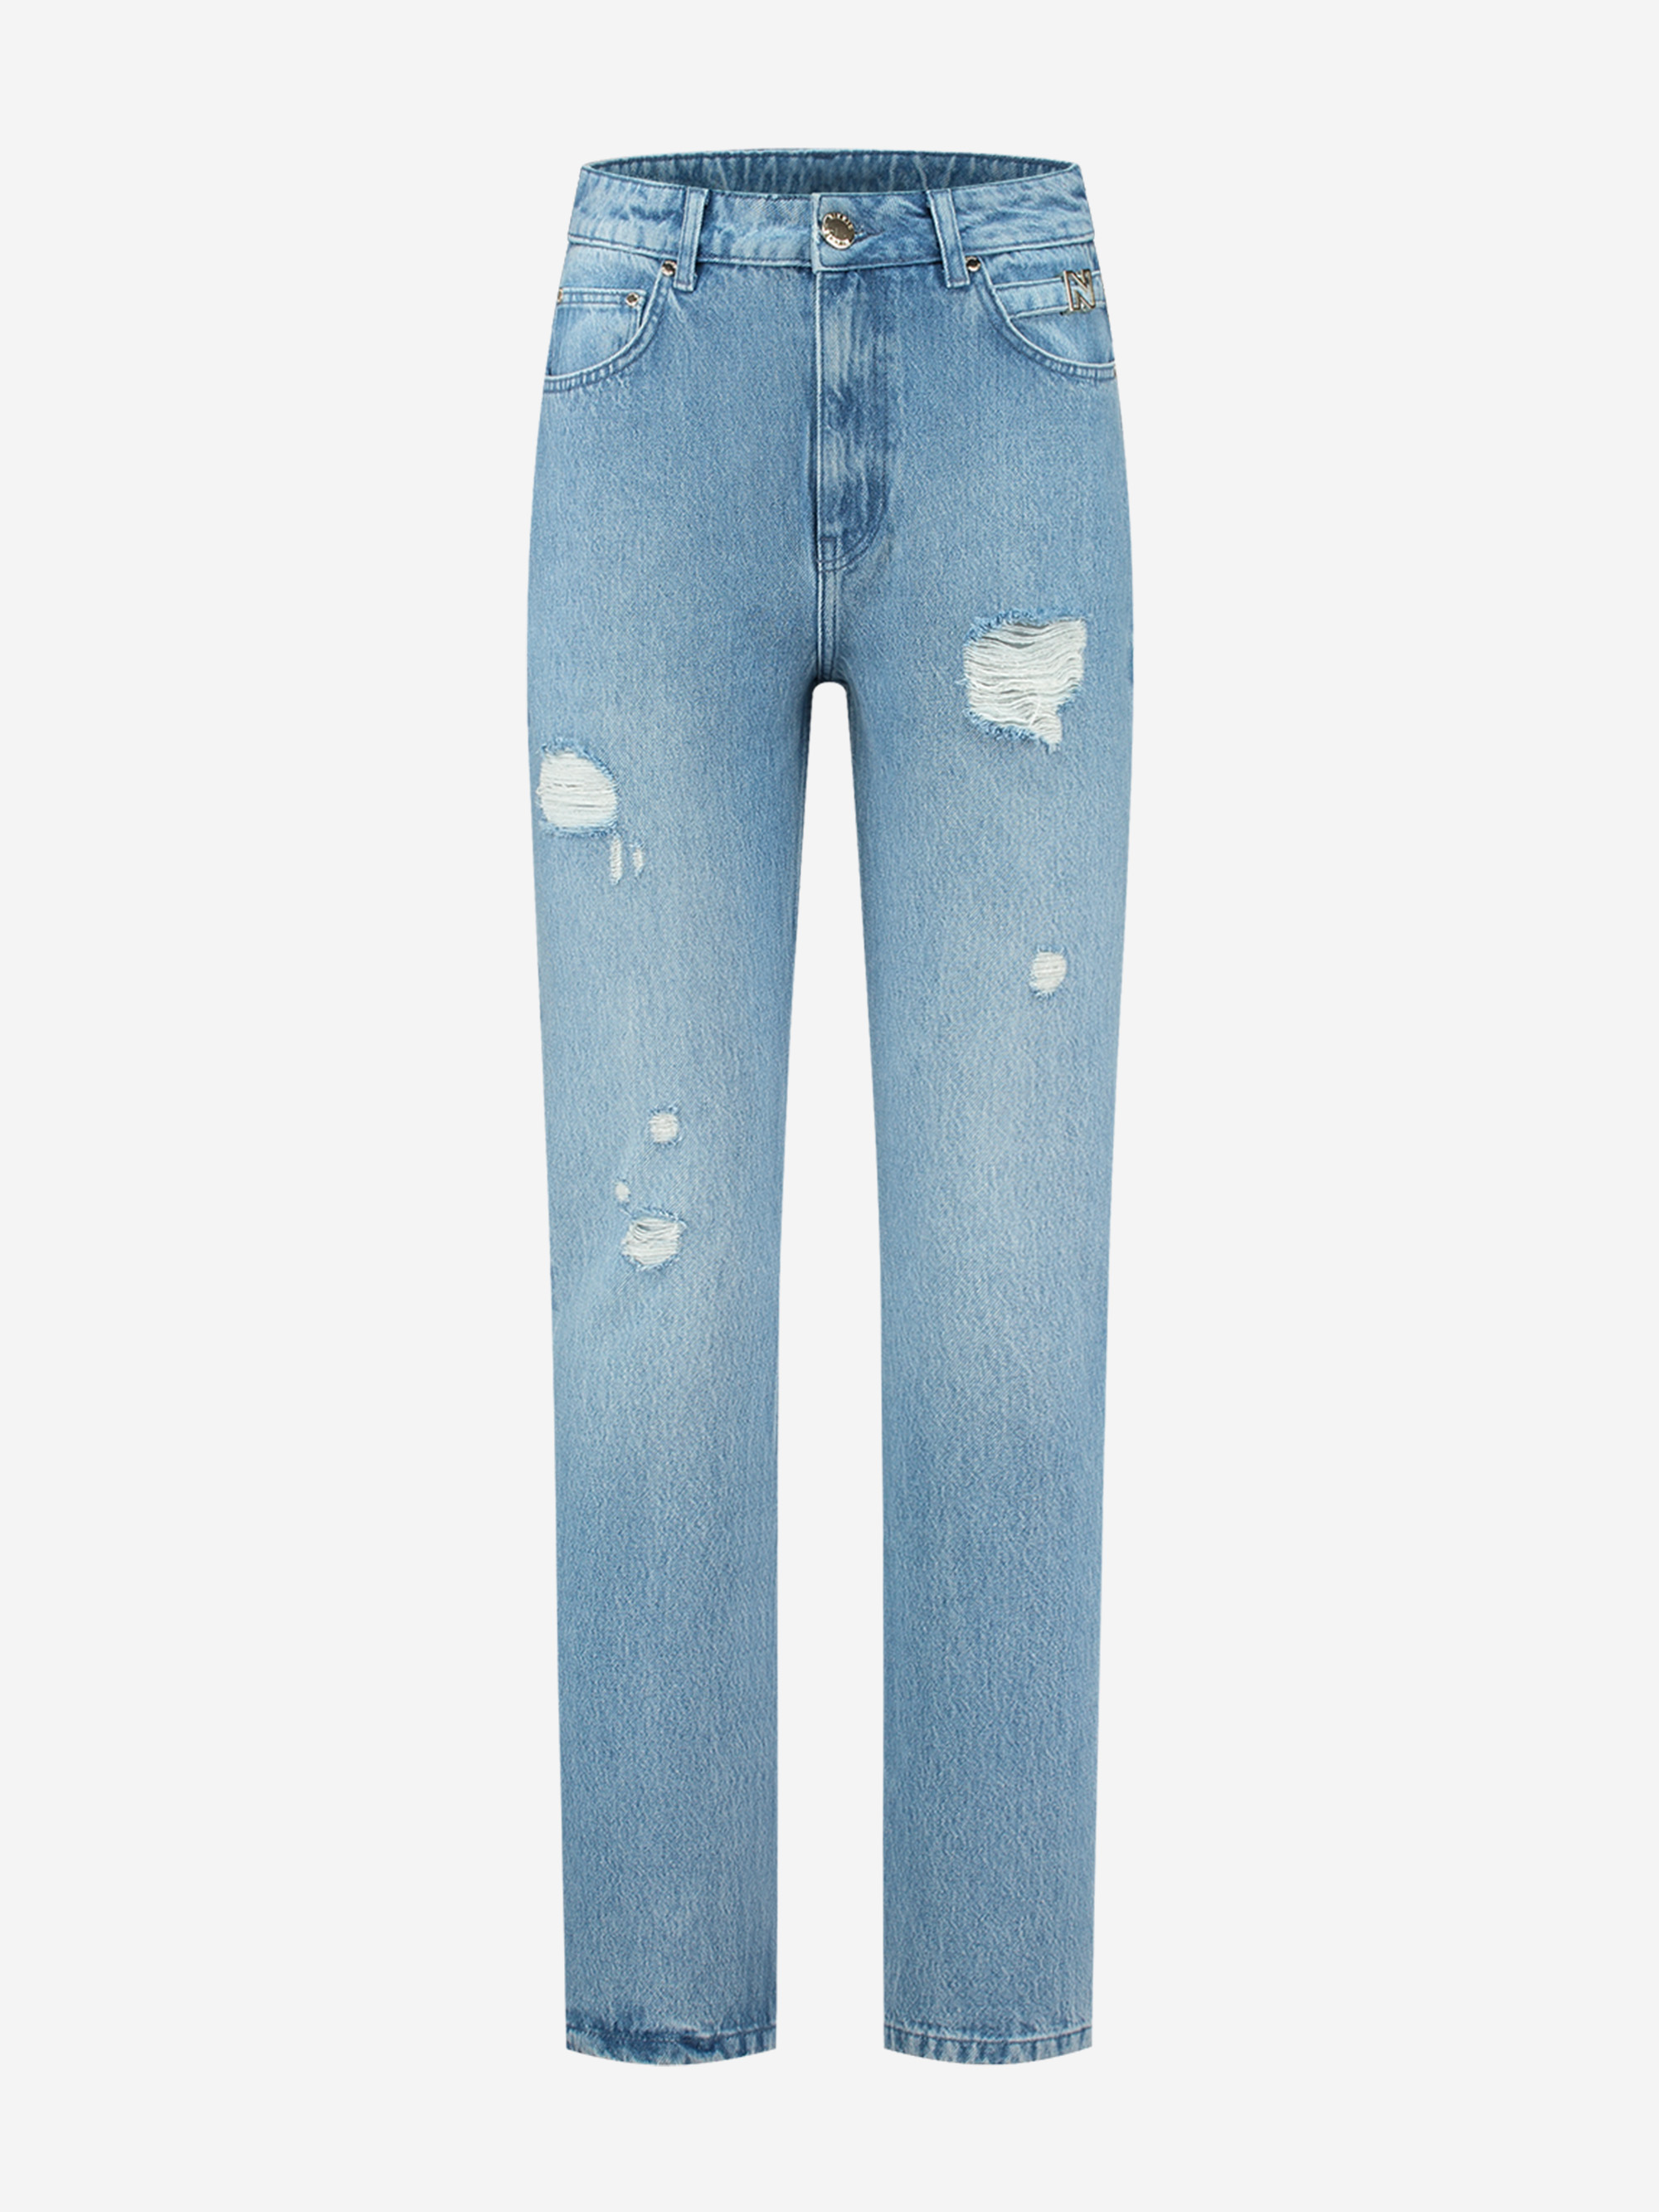 Straight denim jeans with mid rise